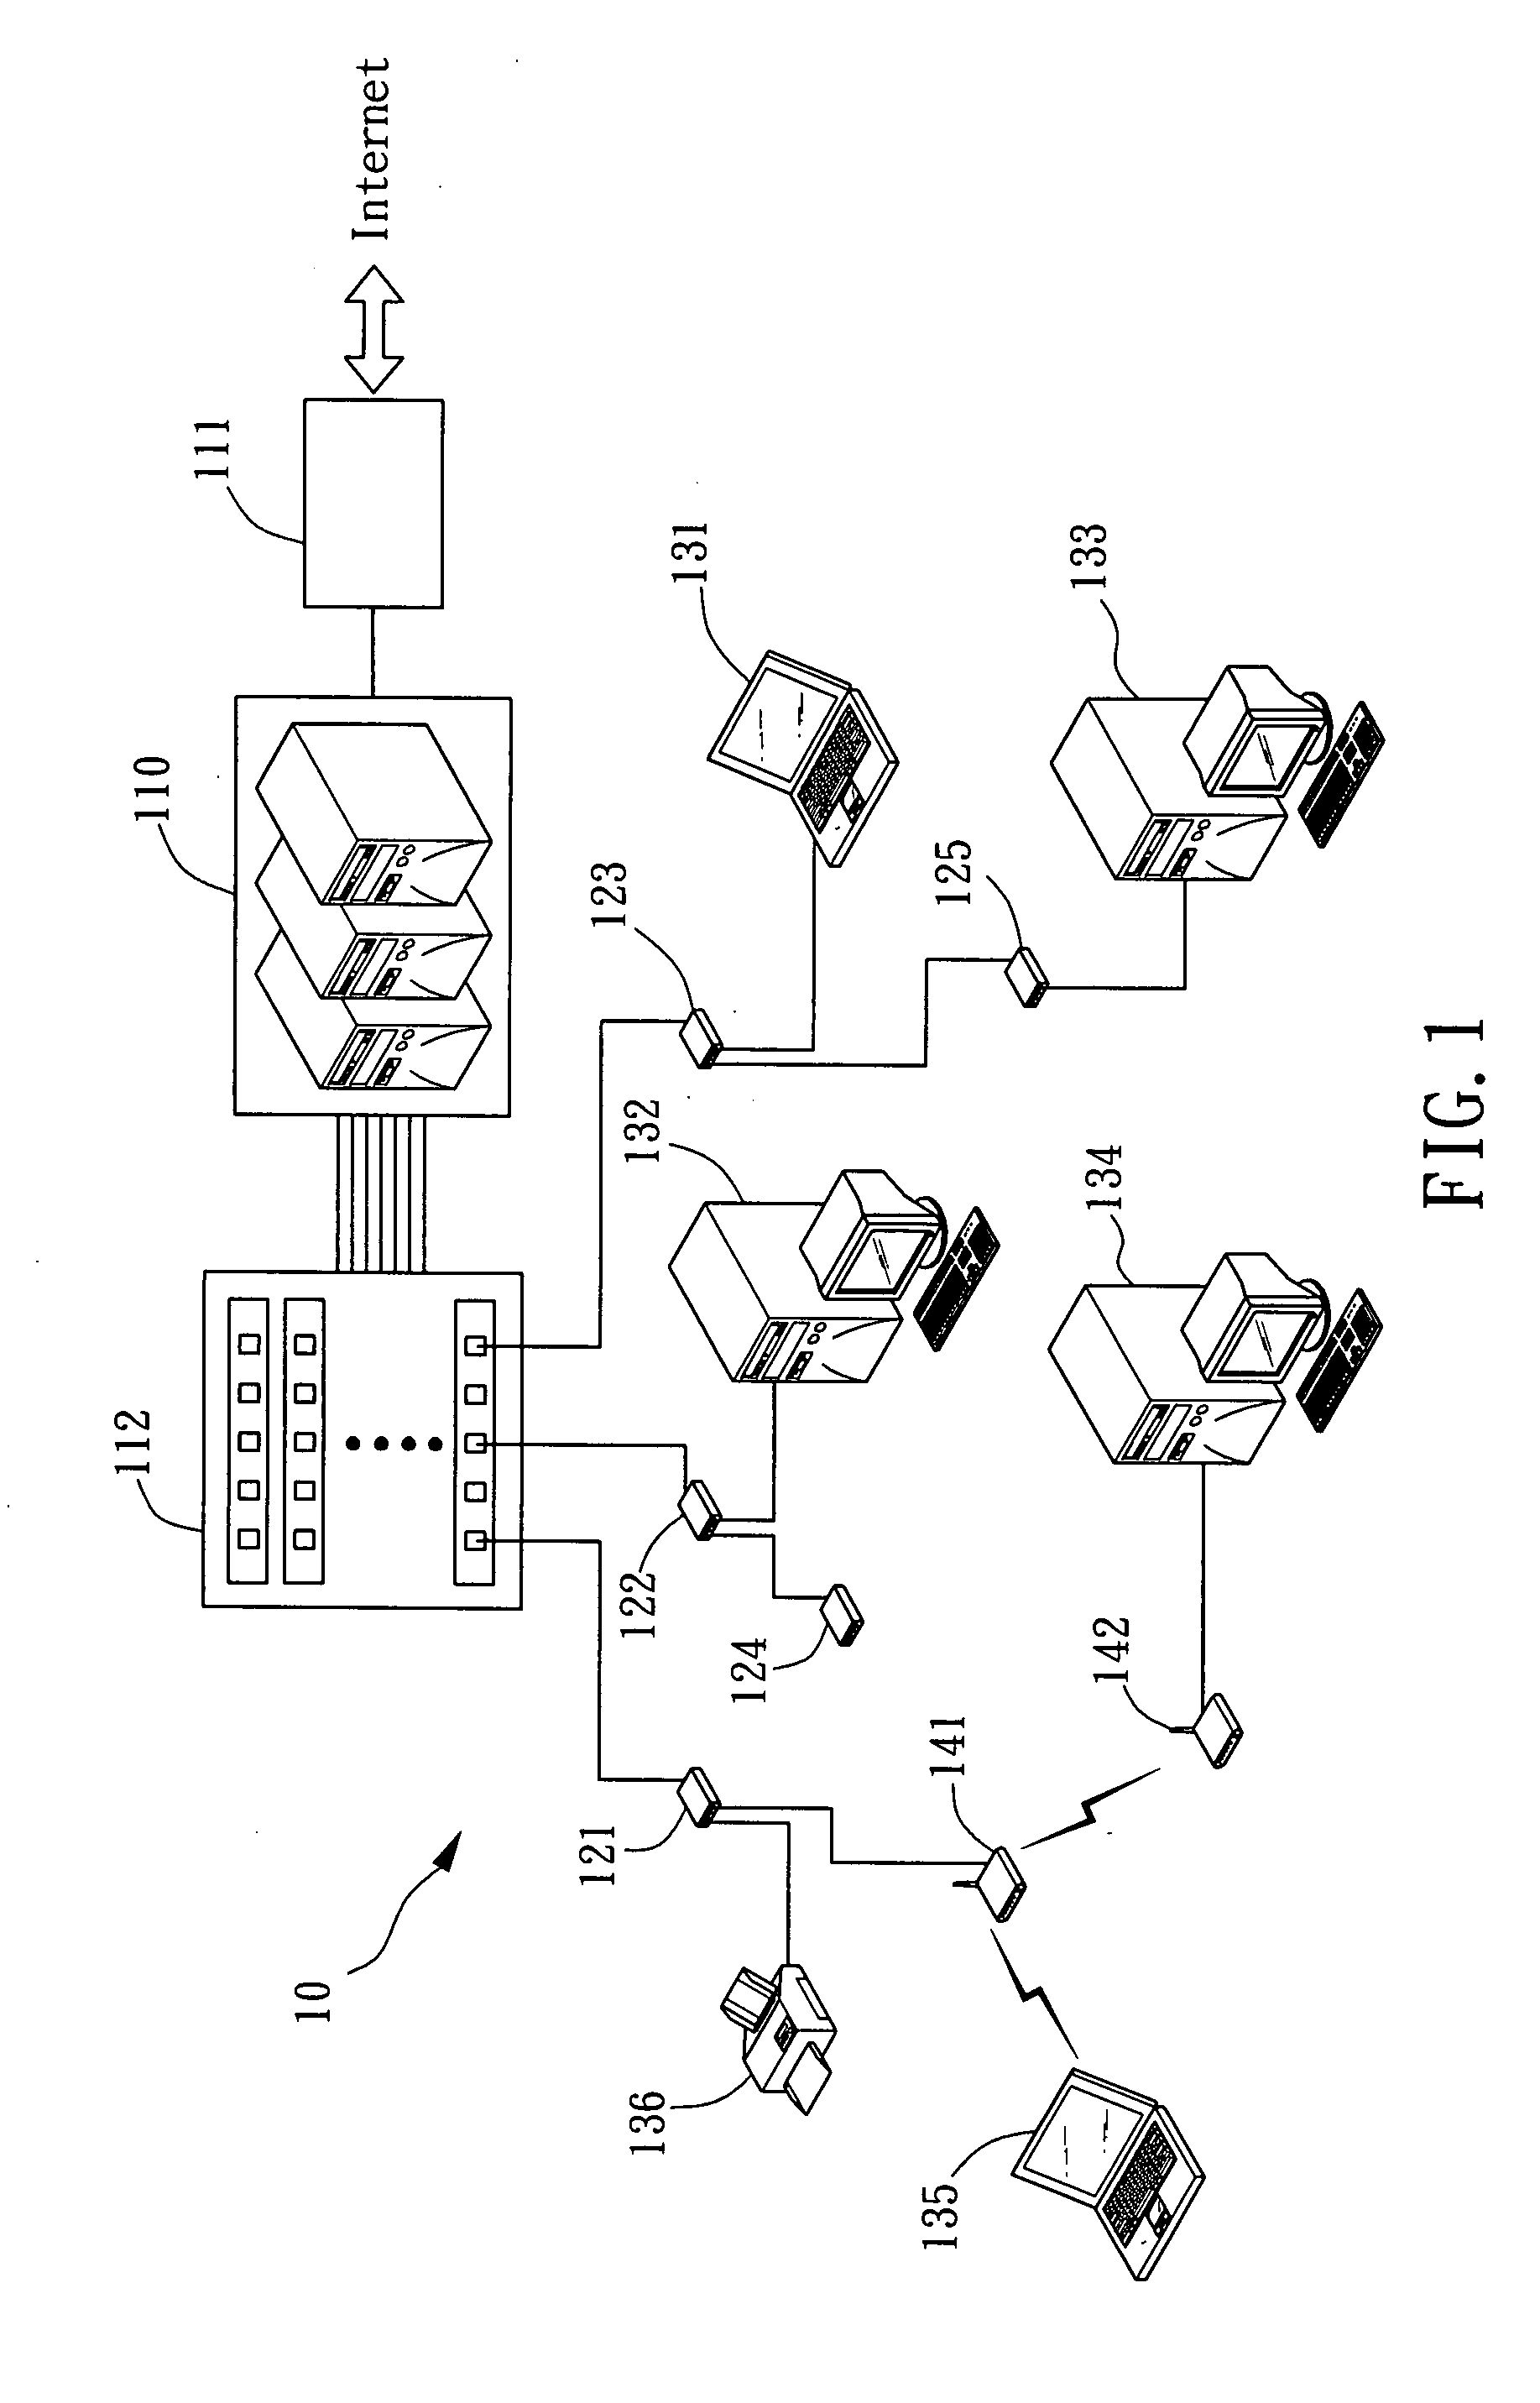 Method for preventing unauthorized connection in network system